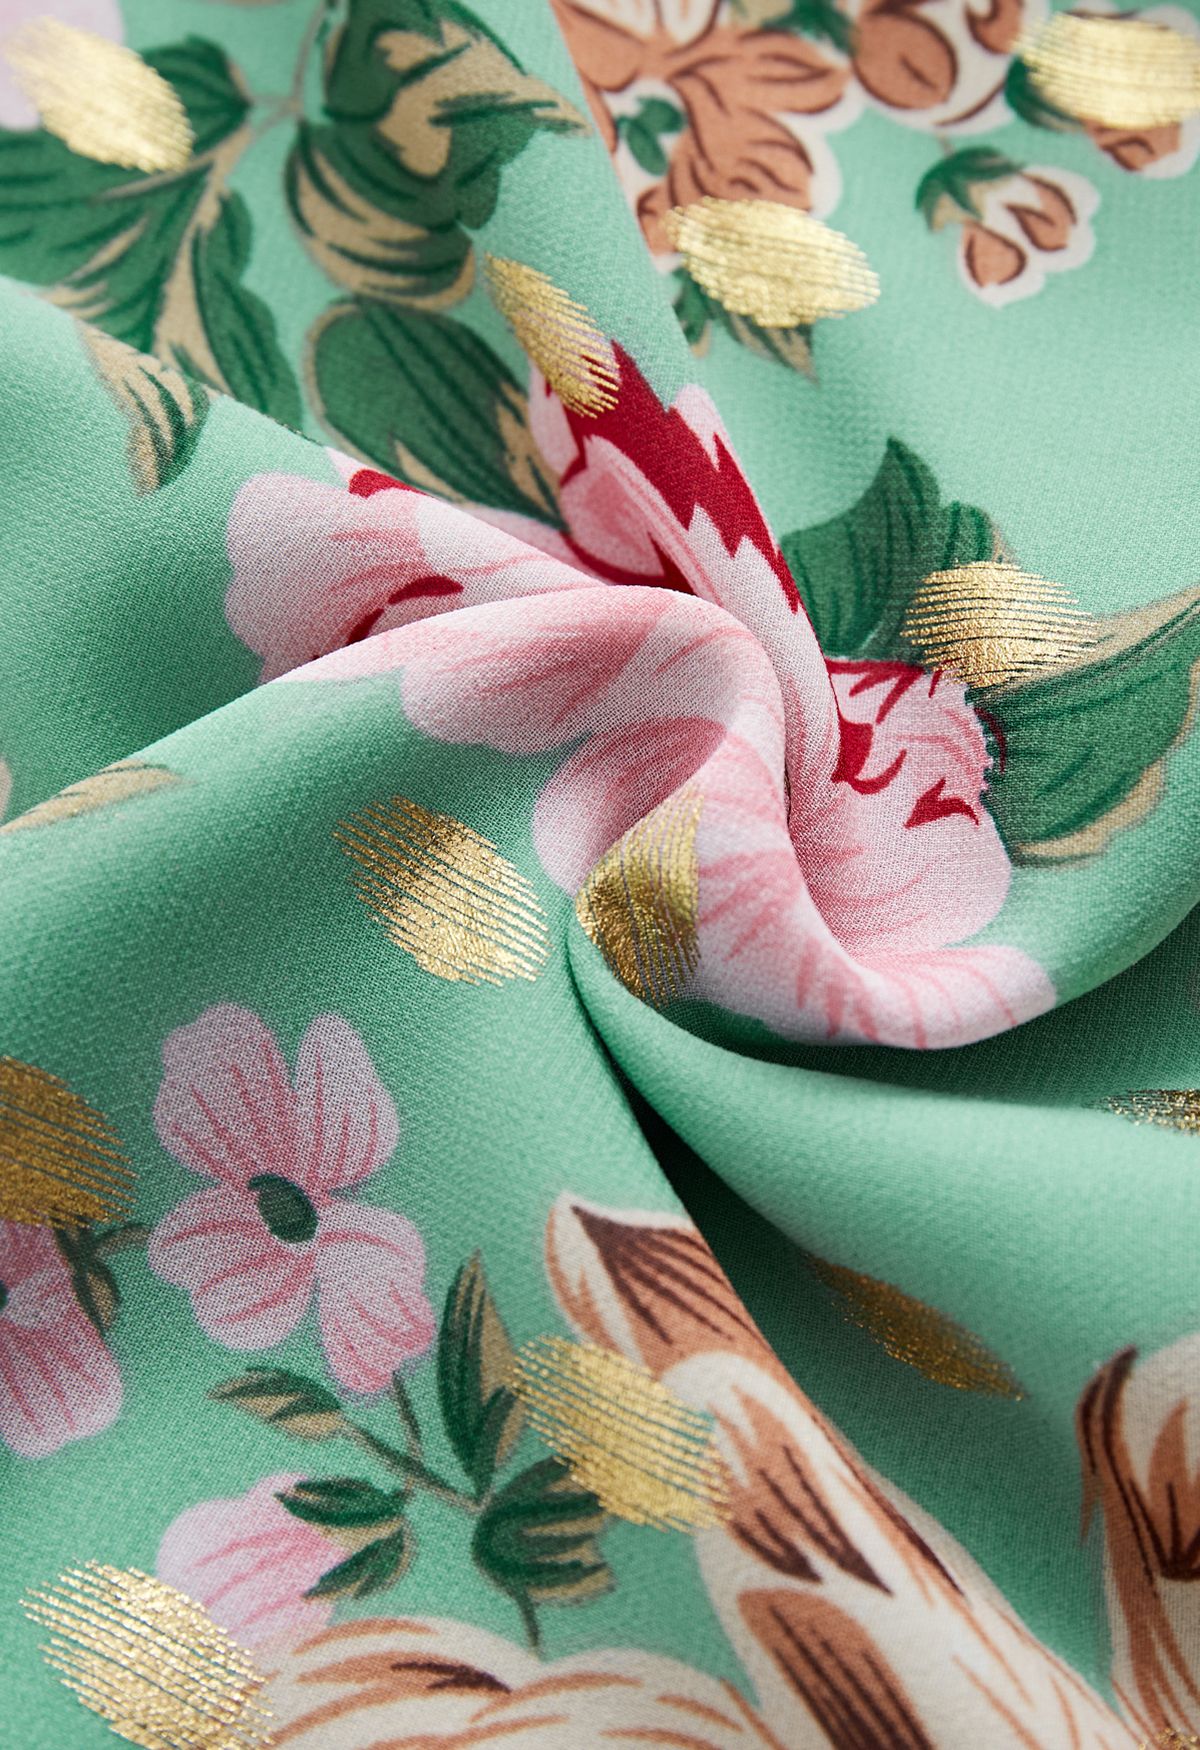 Floral to See Midi Dress with Gold Spot in Mint